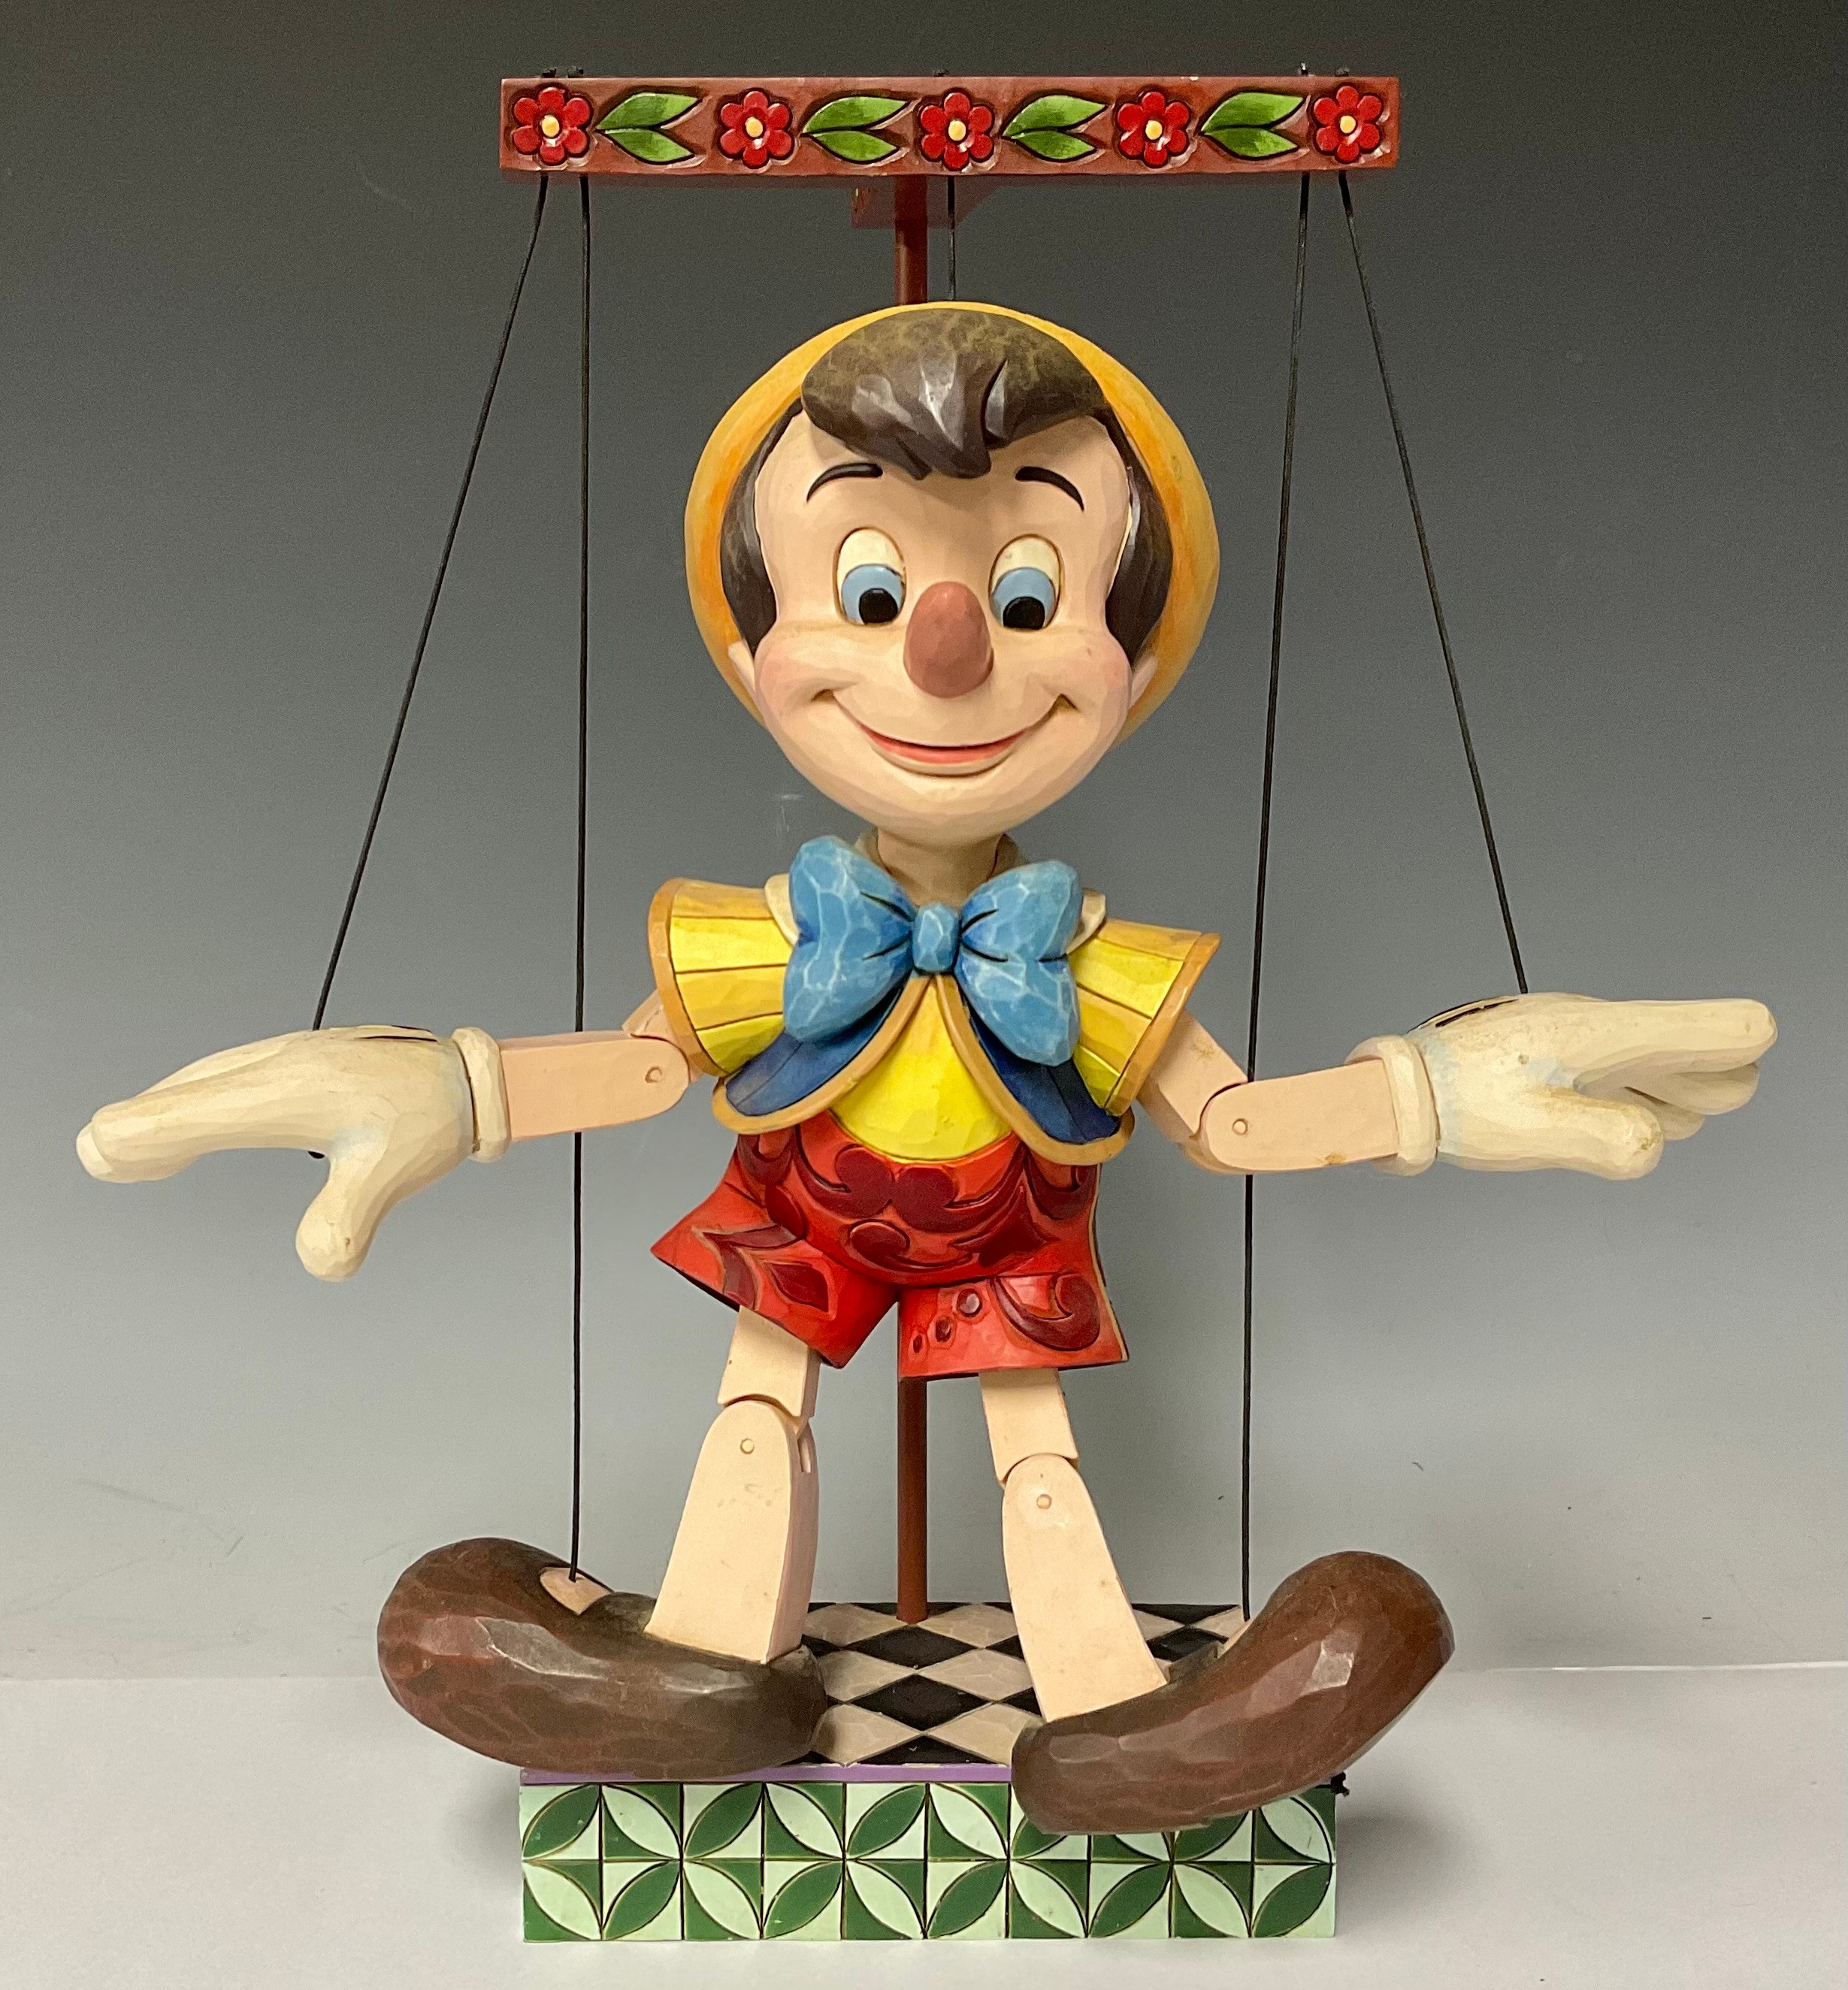 A Walt Disney Showcase model, Pinocchio, 70 Years of Wishing On A Star, resin puppet model on stand,